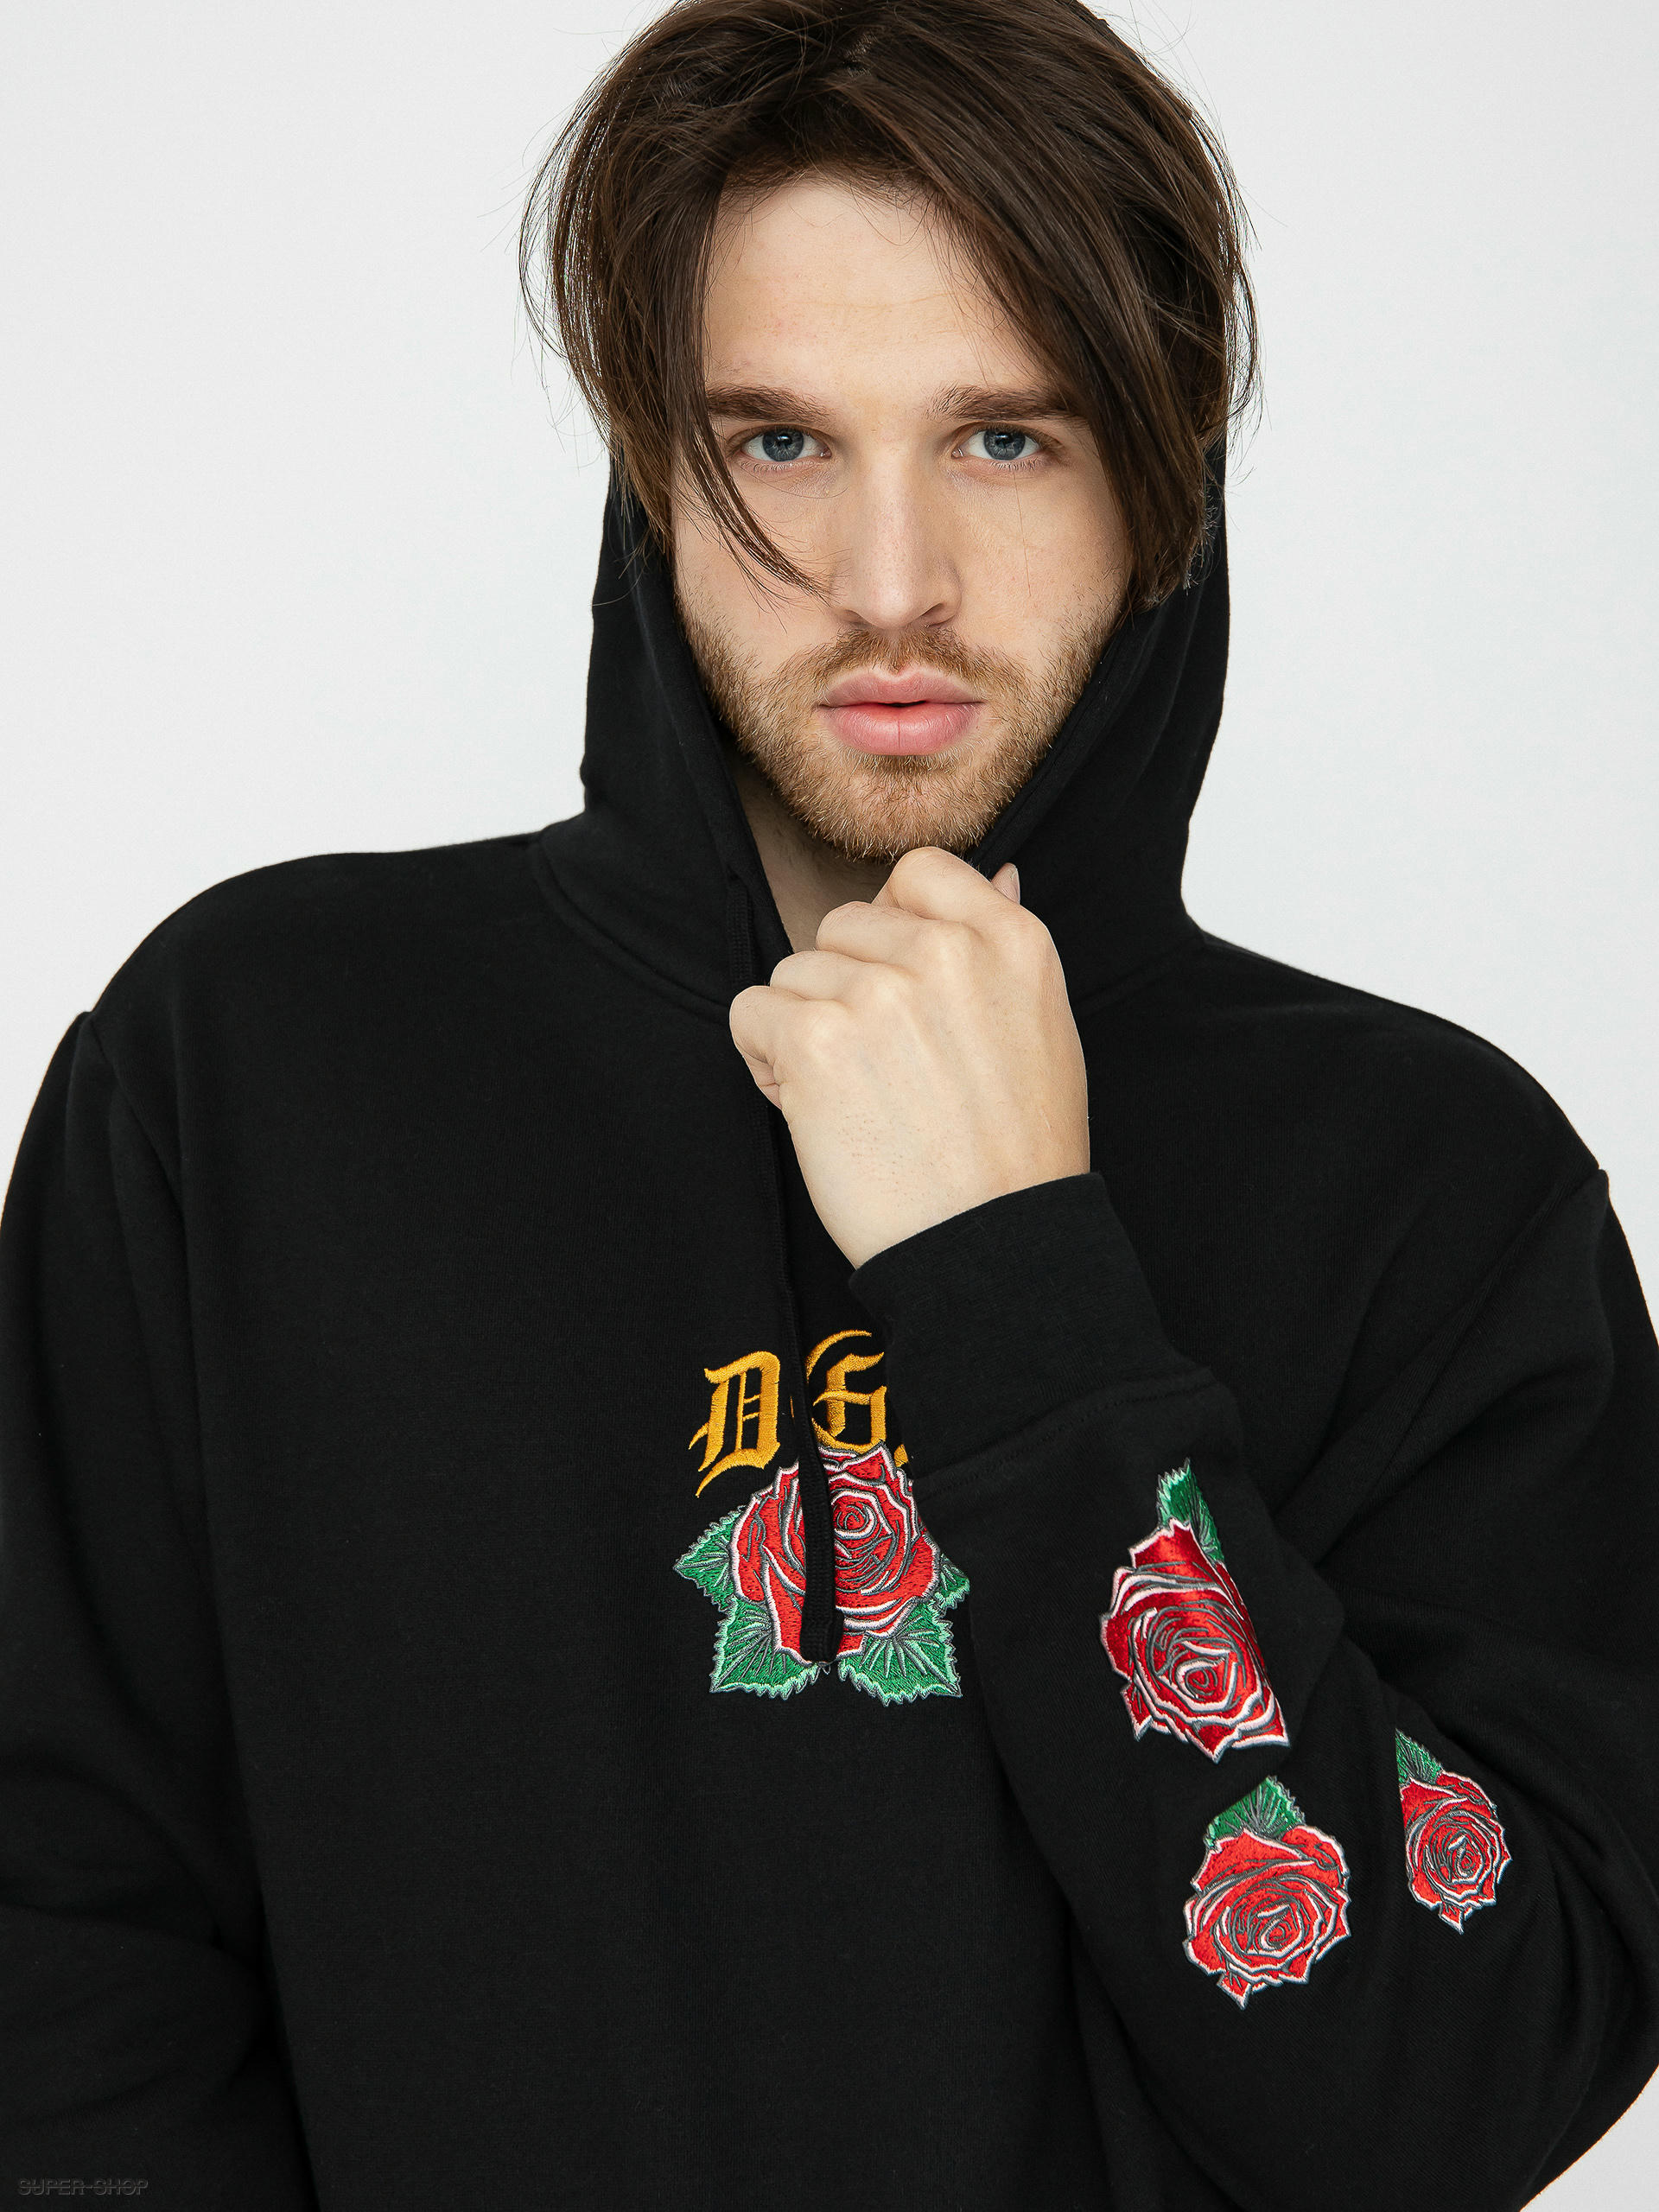 DGK Guadalupe Embroidered Black Hoodie